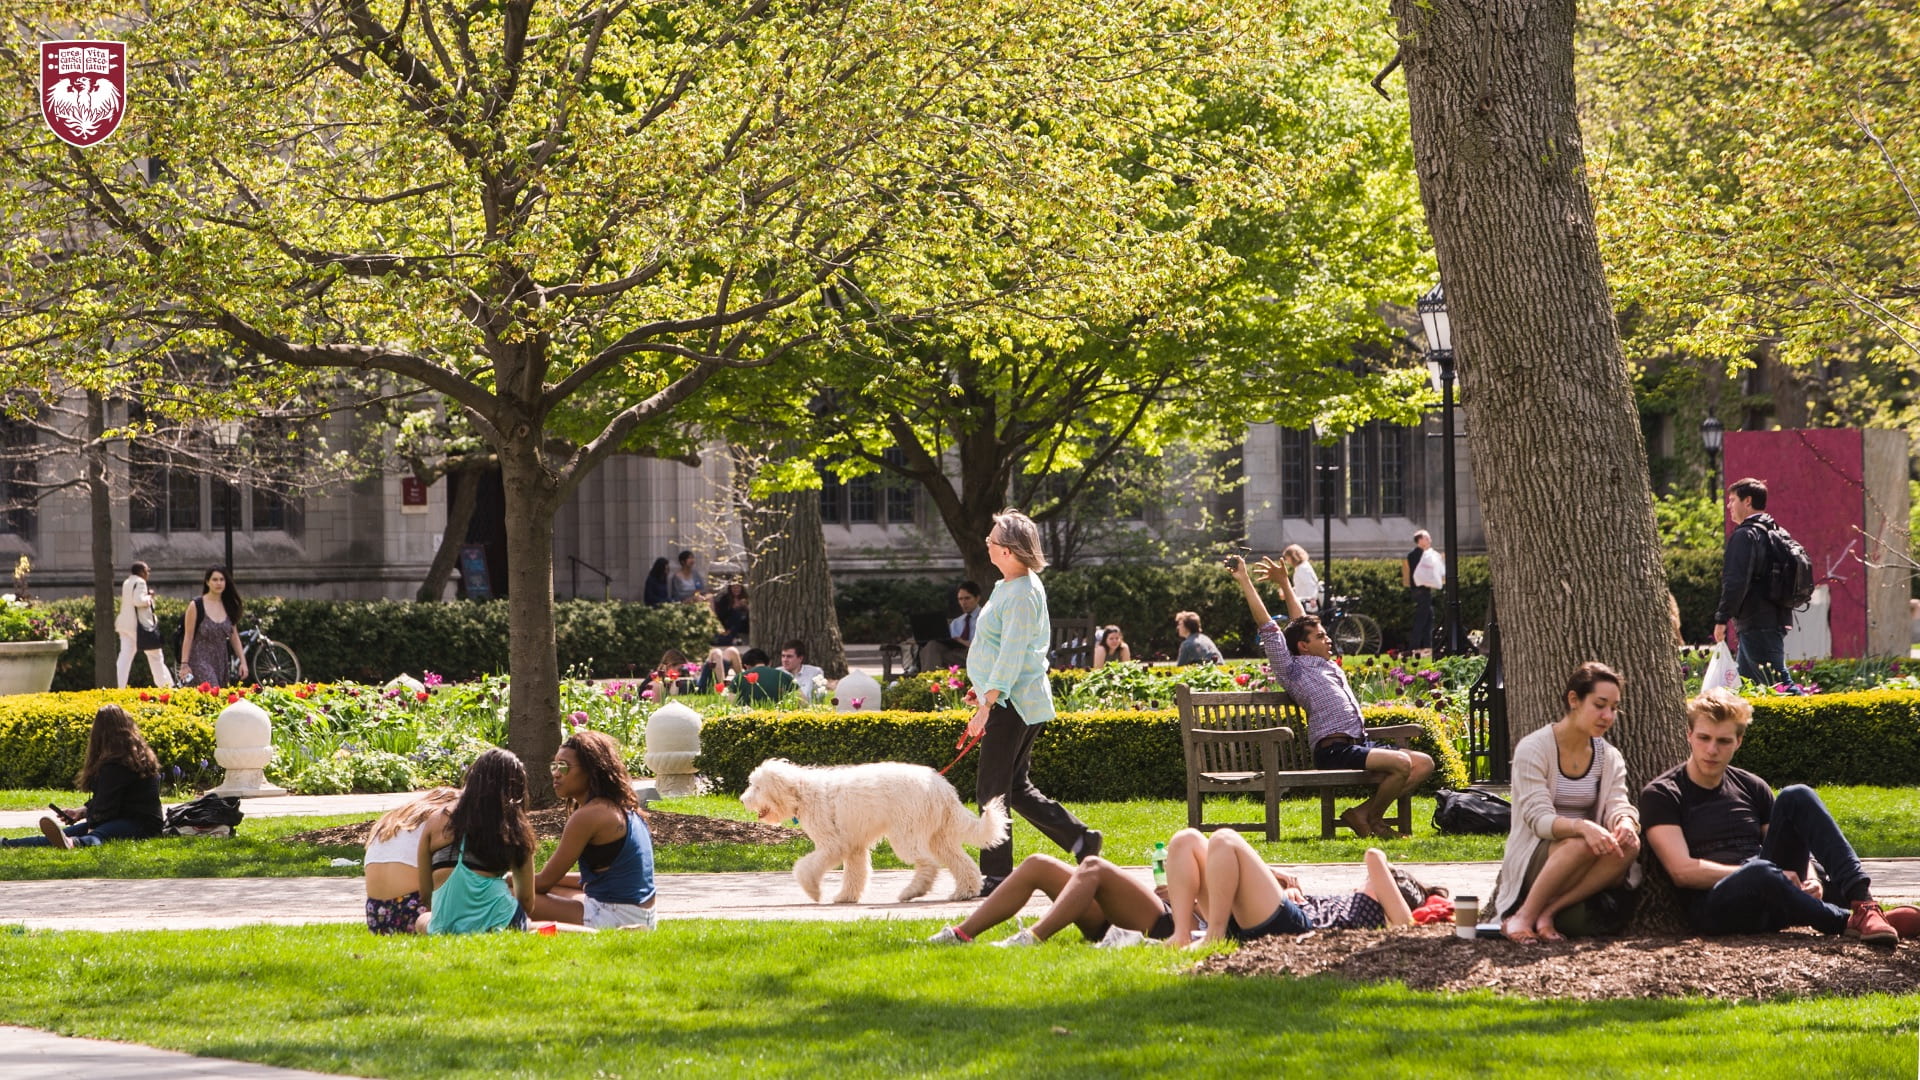 People relaxing in the grass on the quad on a warm day